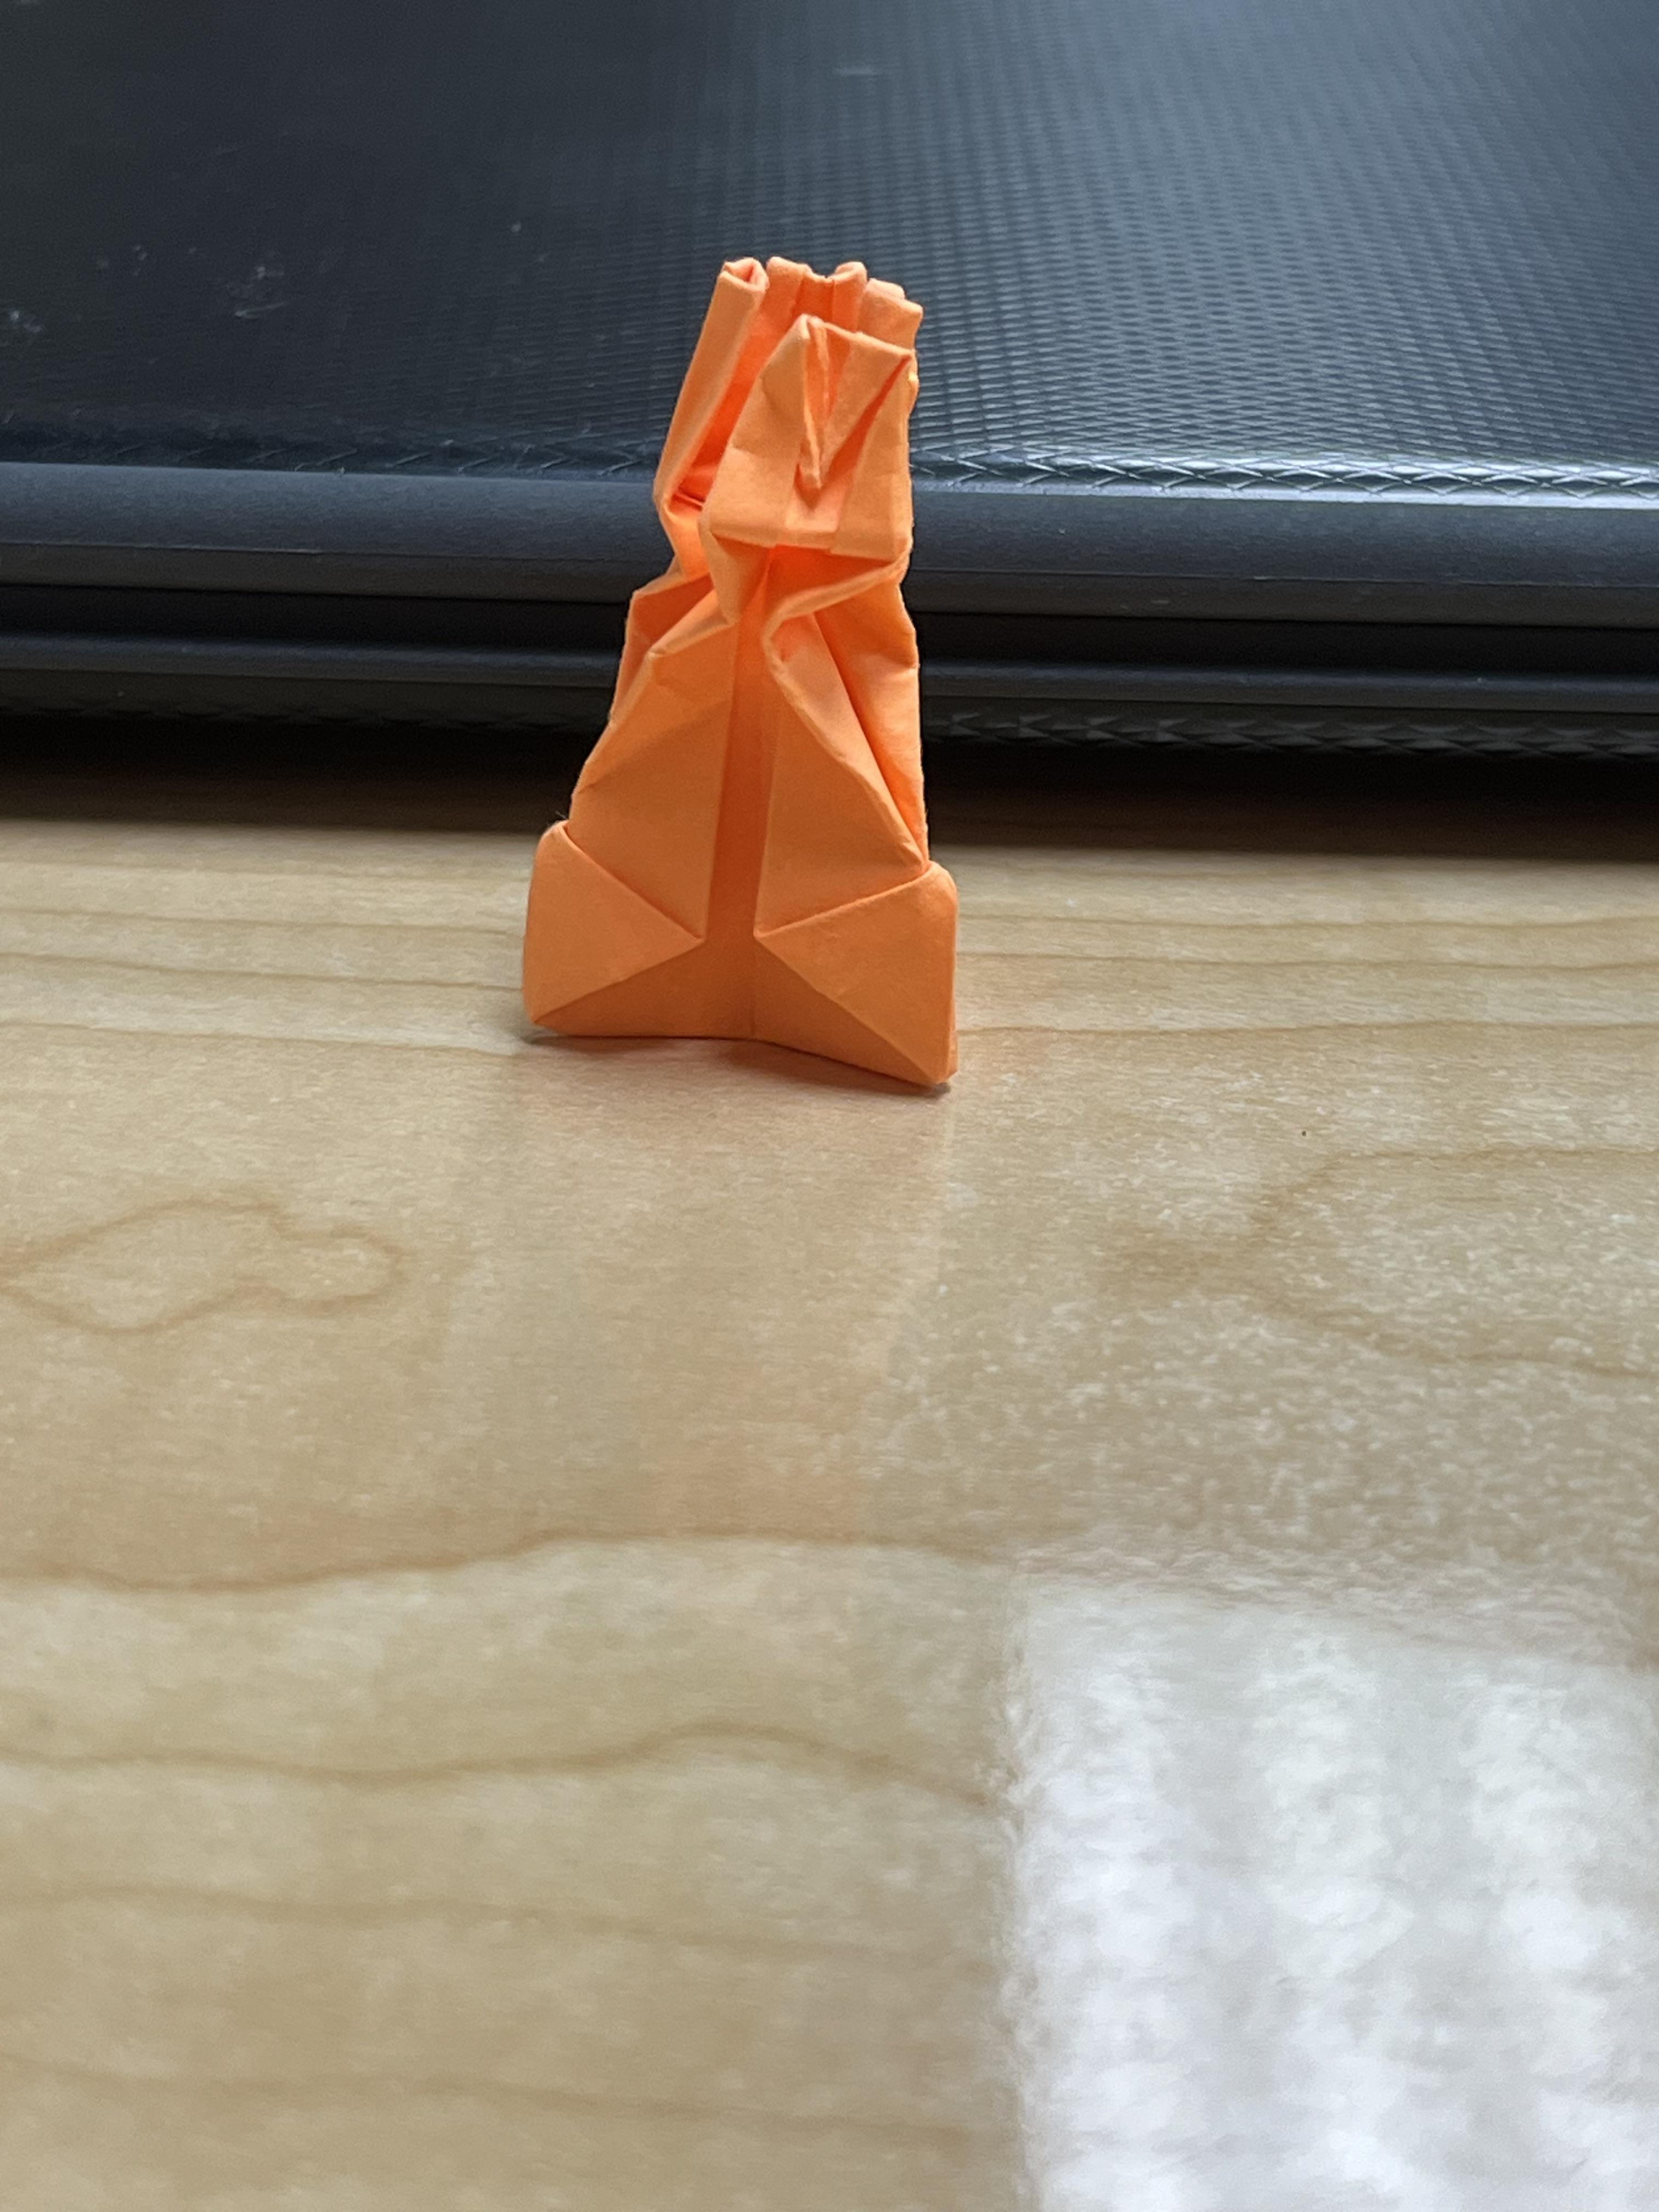 How to Make an Origami Pawn